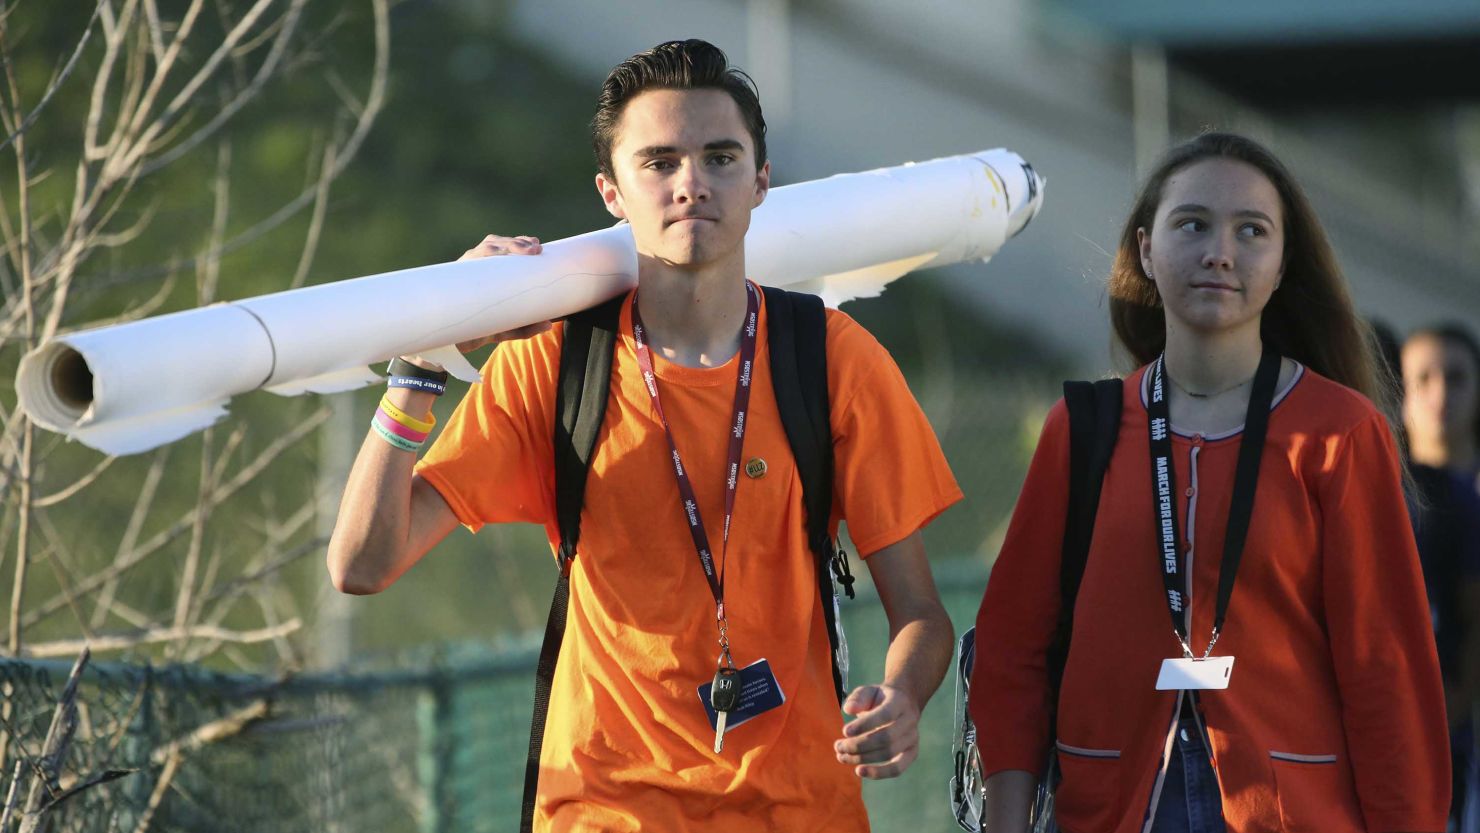 Marjory Stoneman Douglas student David Hogg walks to school with a large rolled banner over his shoulder on Friday, April 20, 2018 in Parkland, Florida